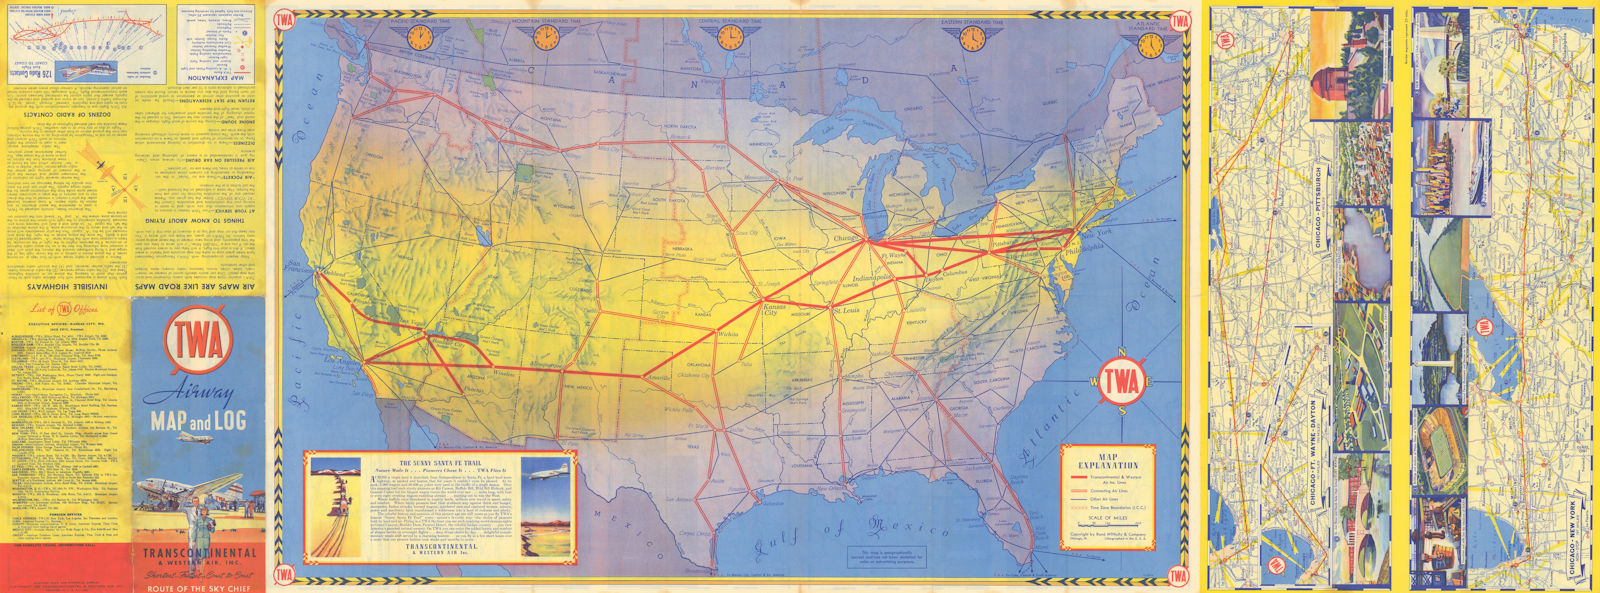 TWA Airway Transcontinental & Western Air Airline network route map 18"x48" 1939